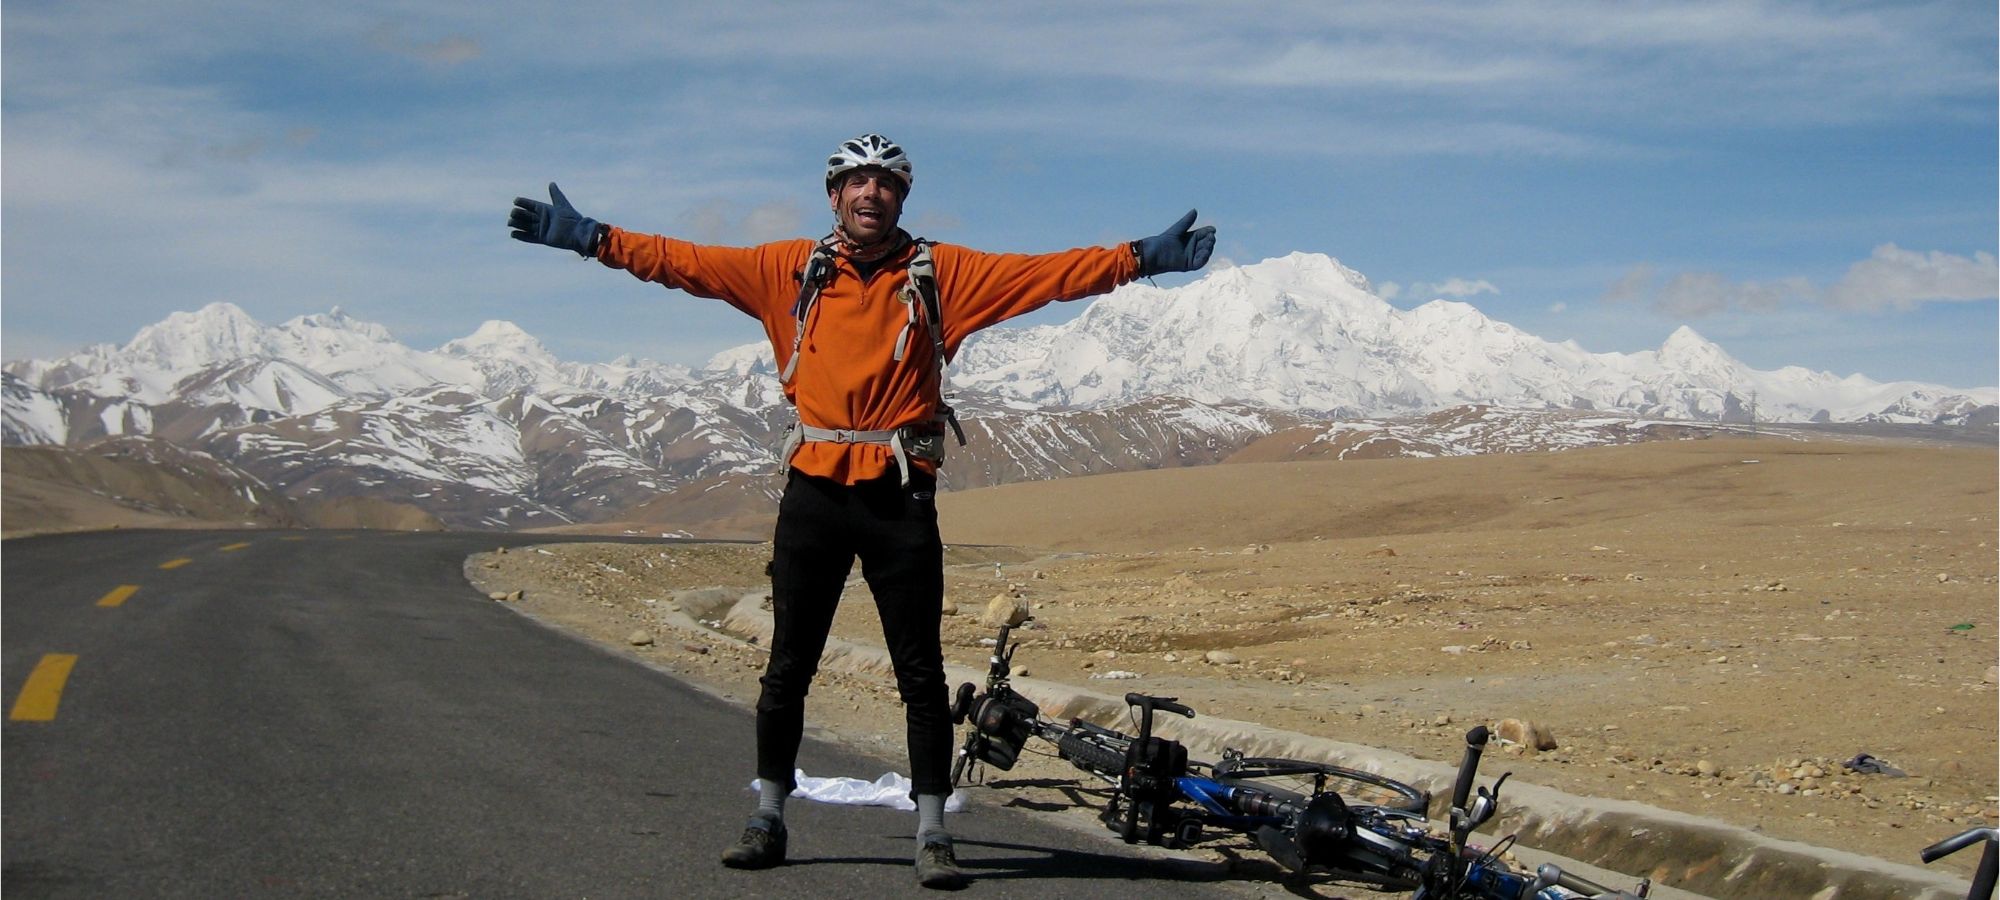 Photos from our Lhasa to Kathmandu Cycling Holiday